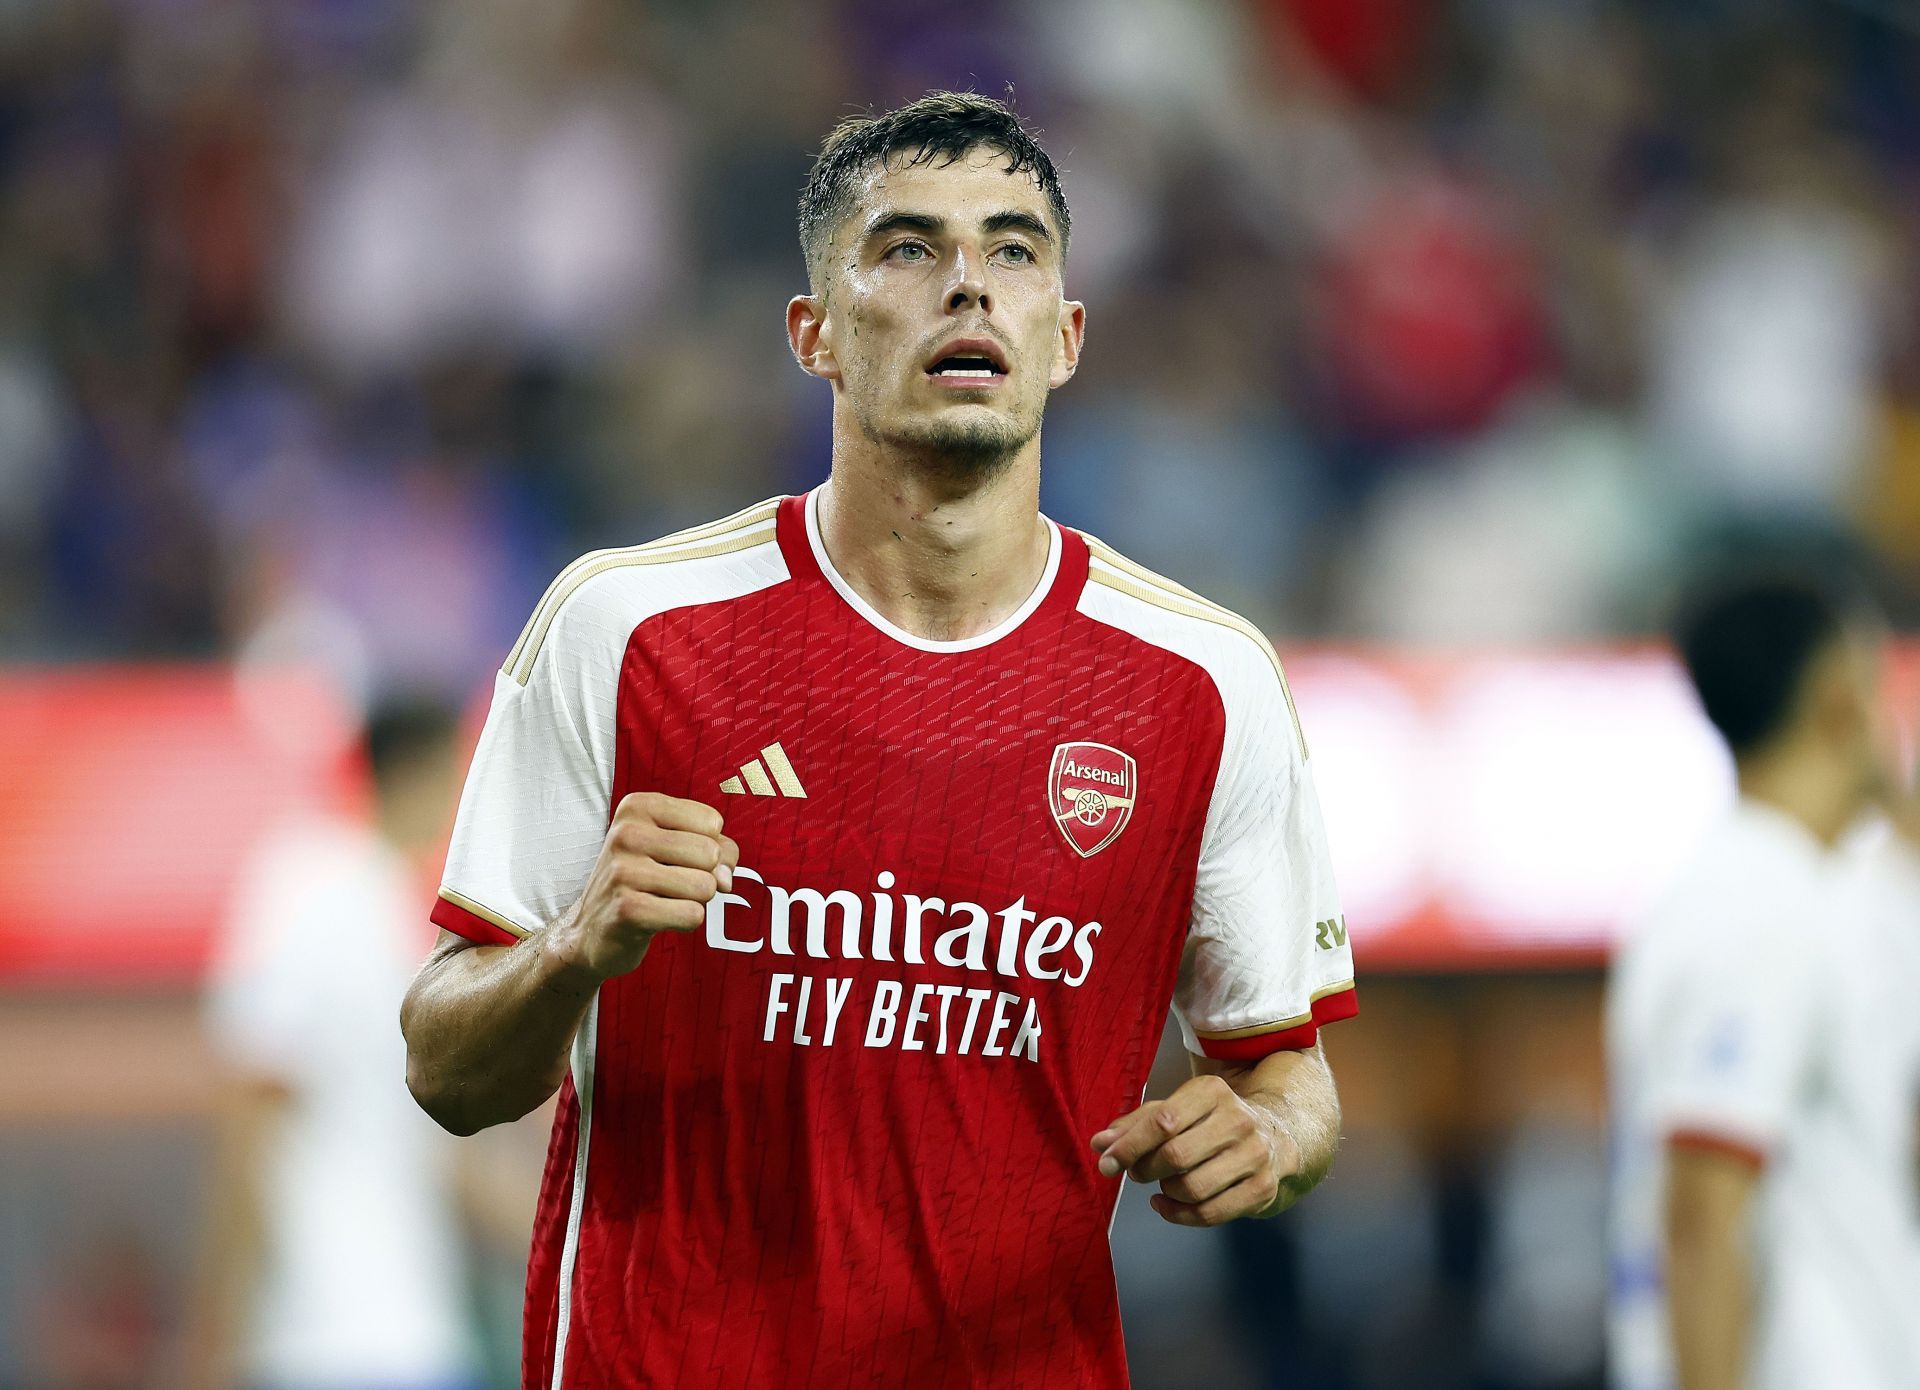 Havertz has moved from Chelsea to Arsenal in this window.